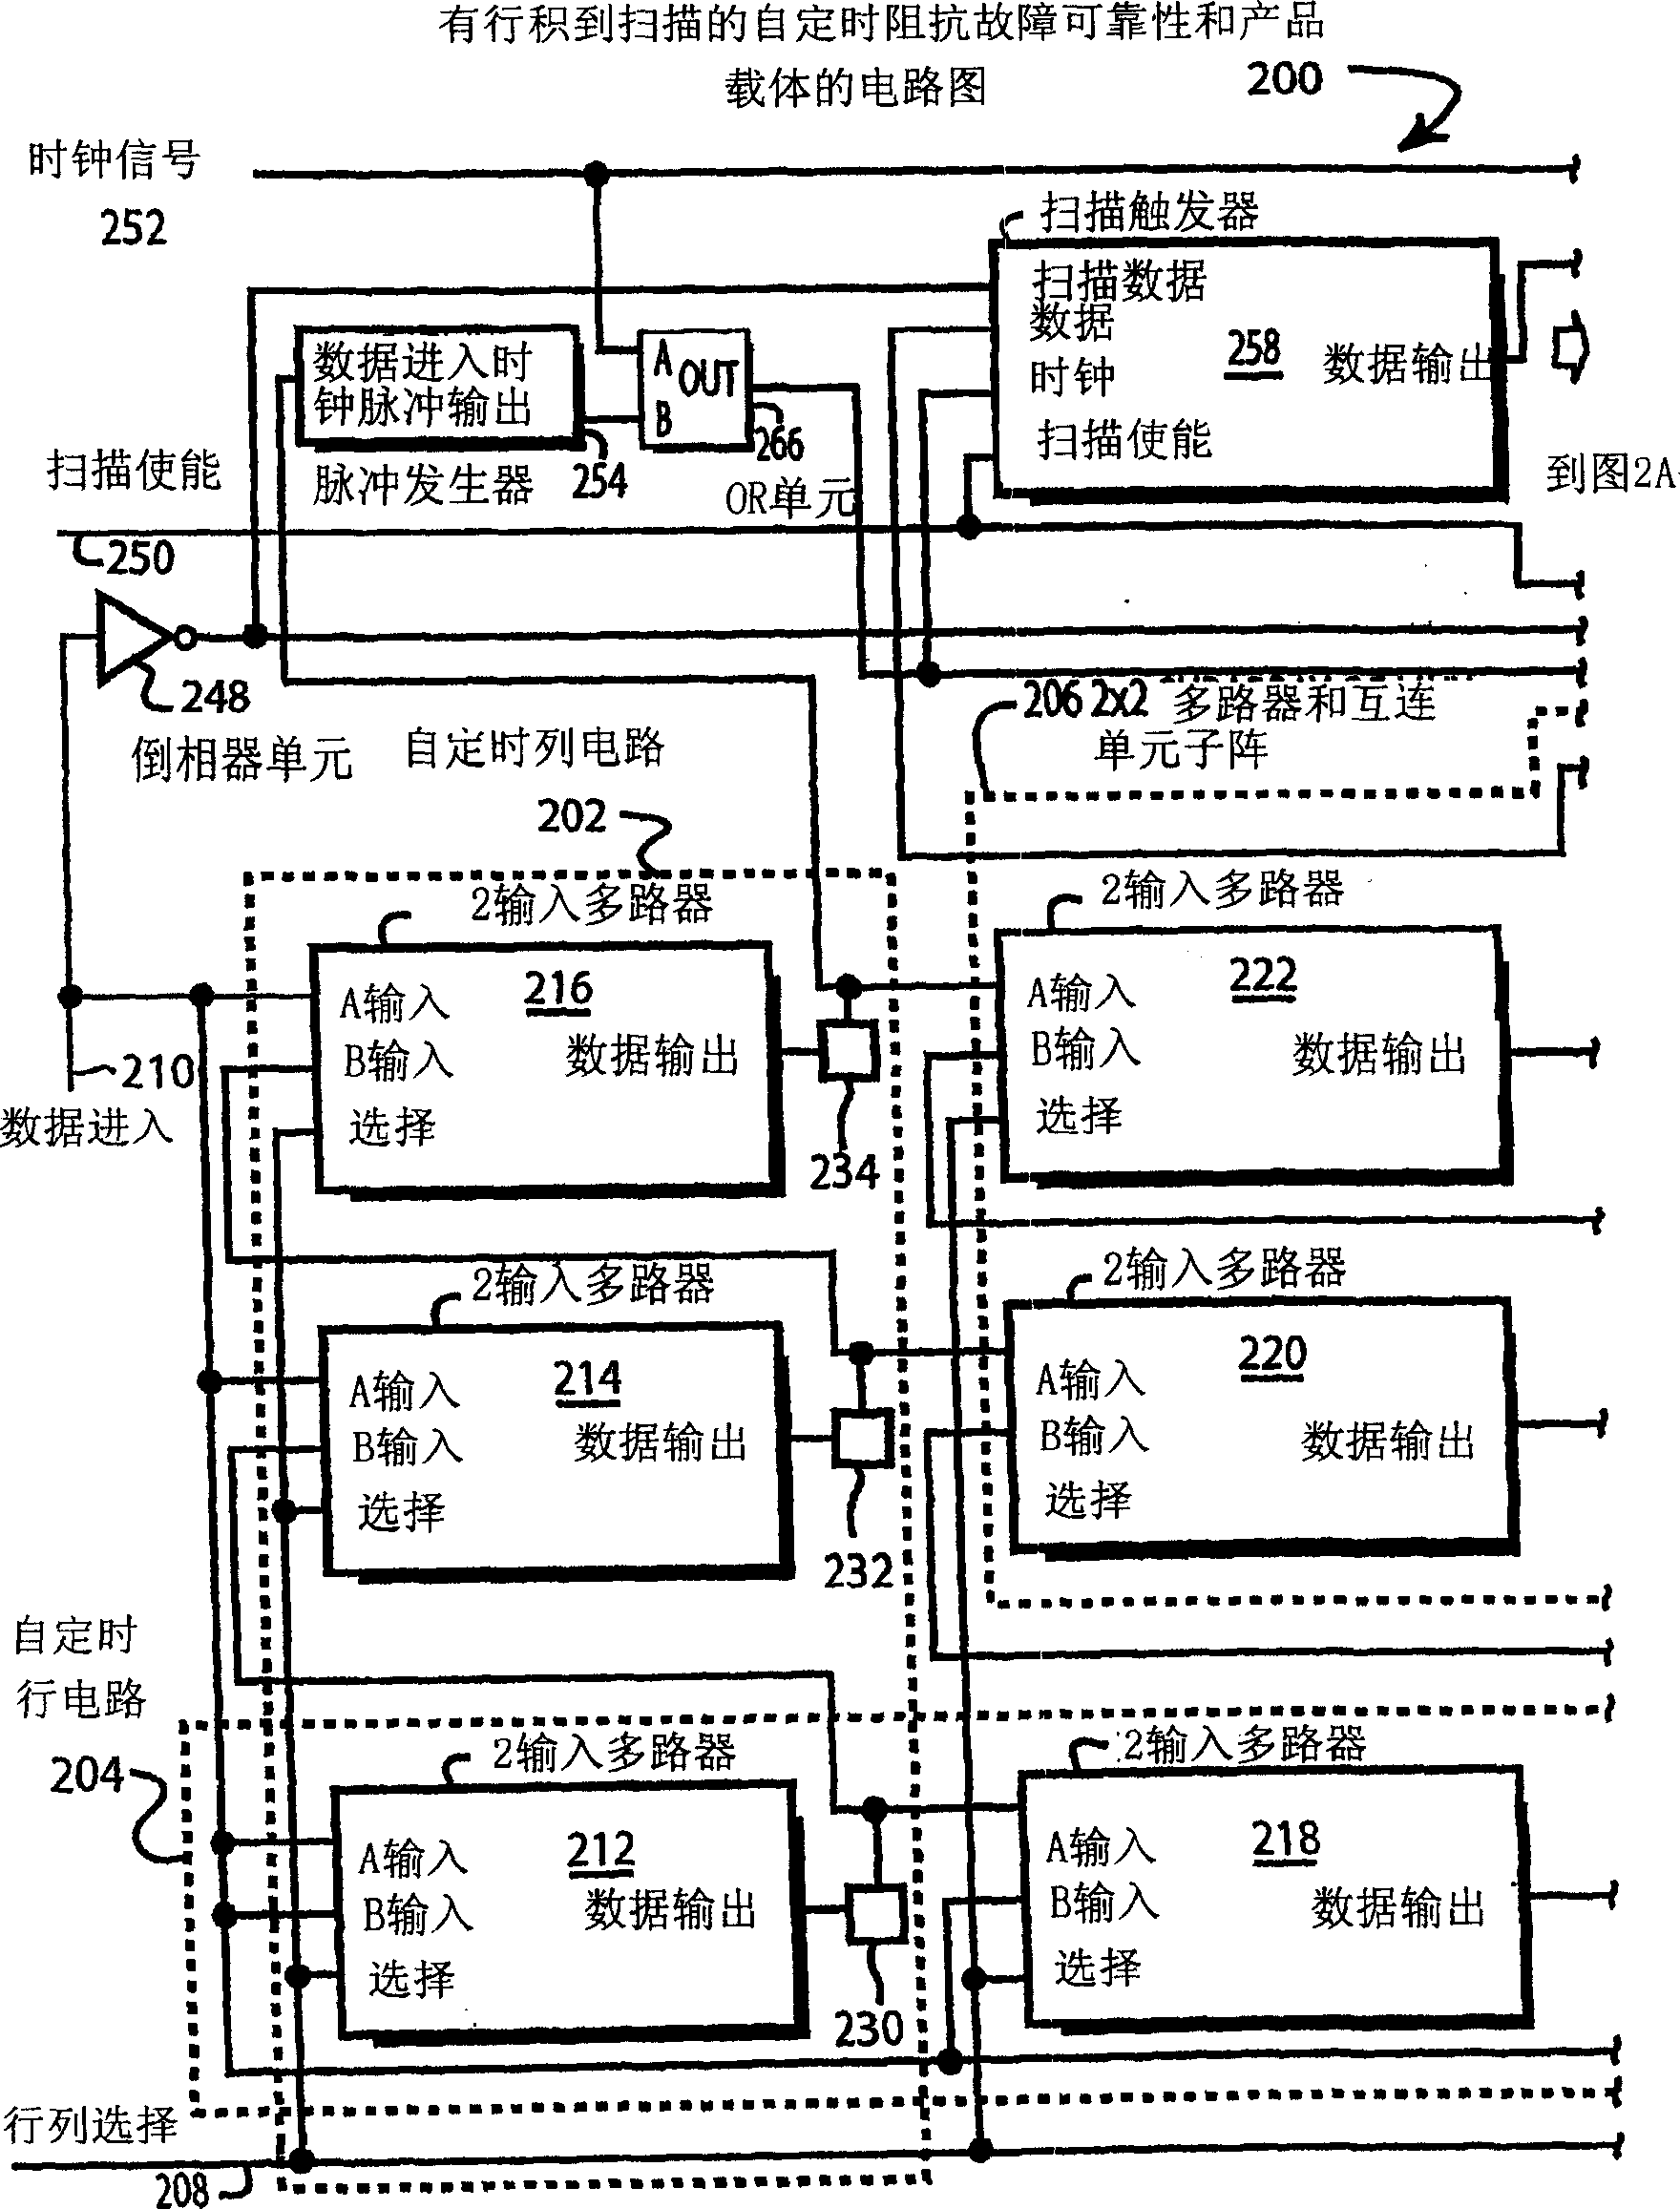 Self-timed reliability and yield vehicle with gated data and clock